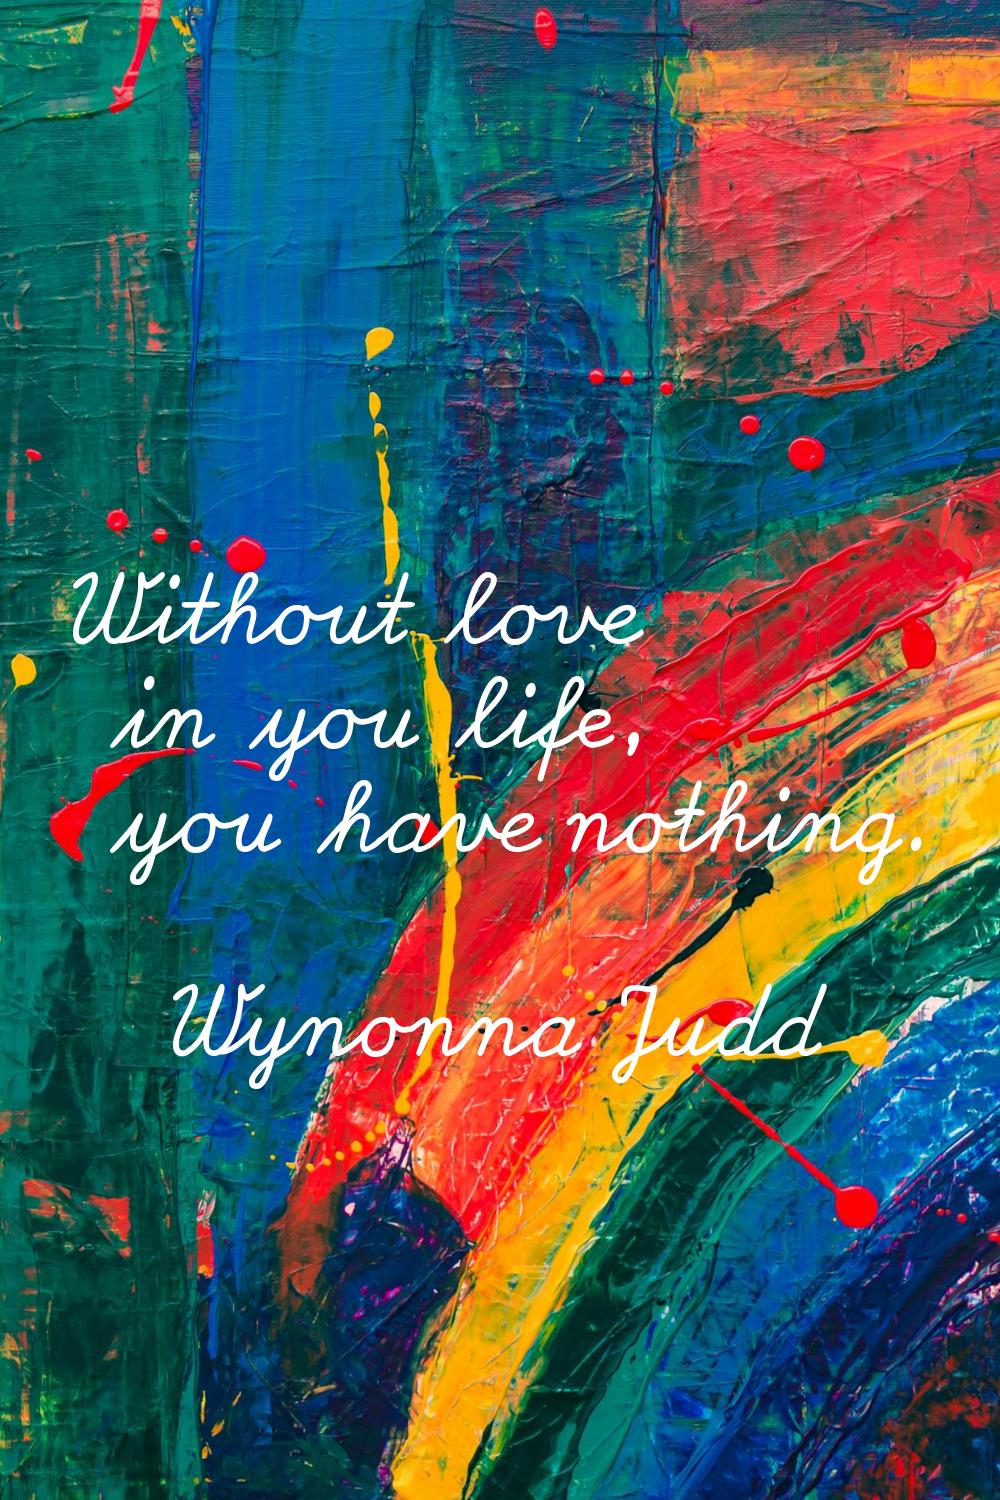 Without love in you life, you have nothing.